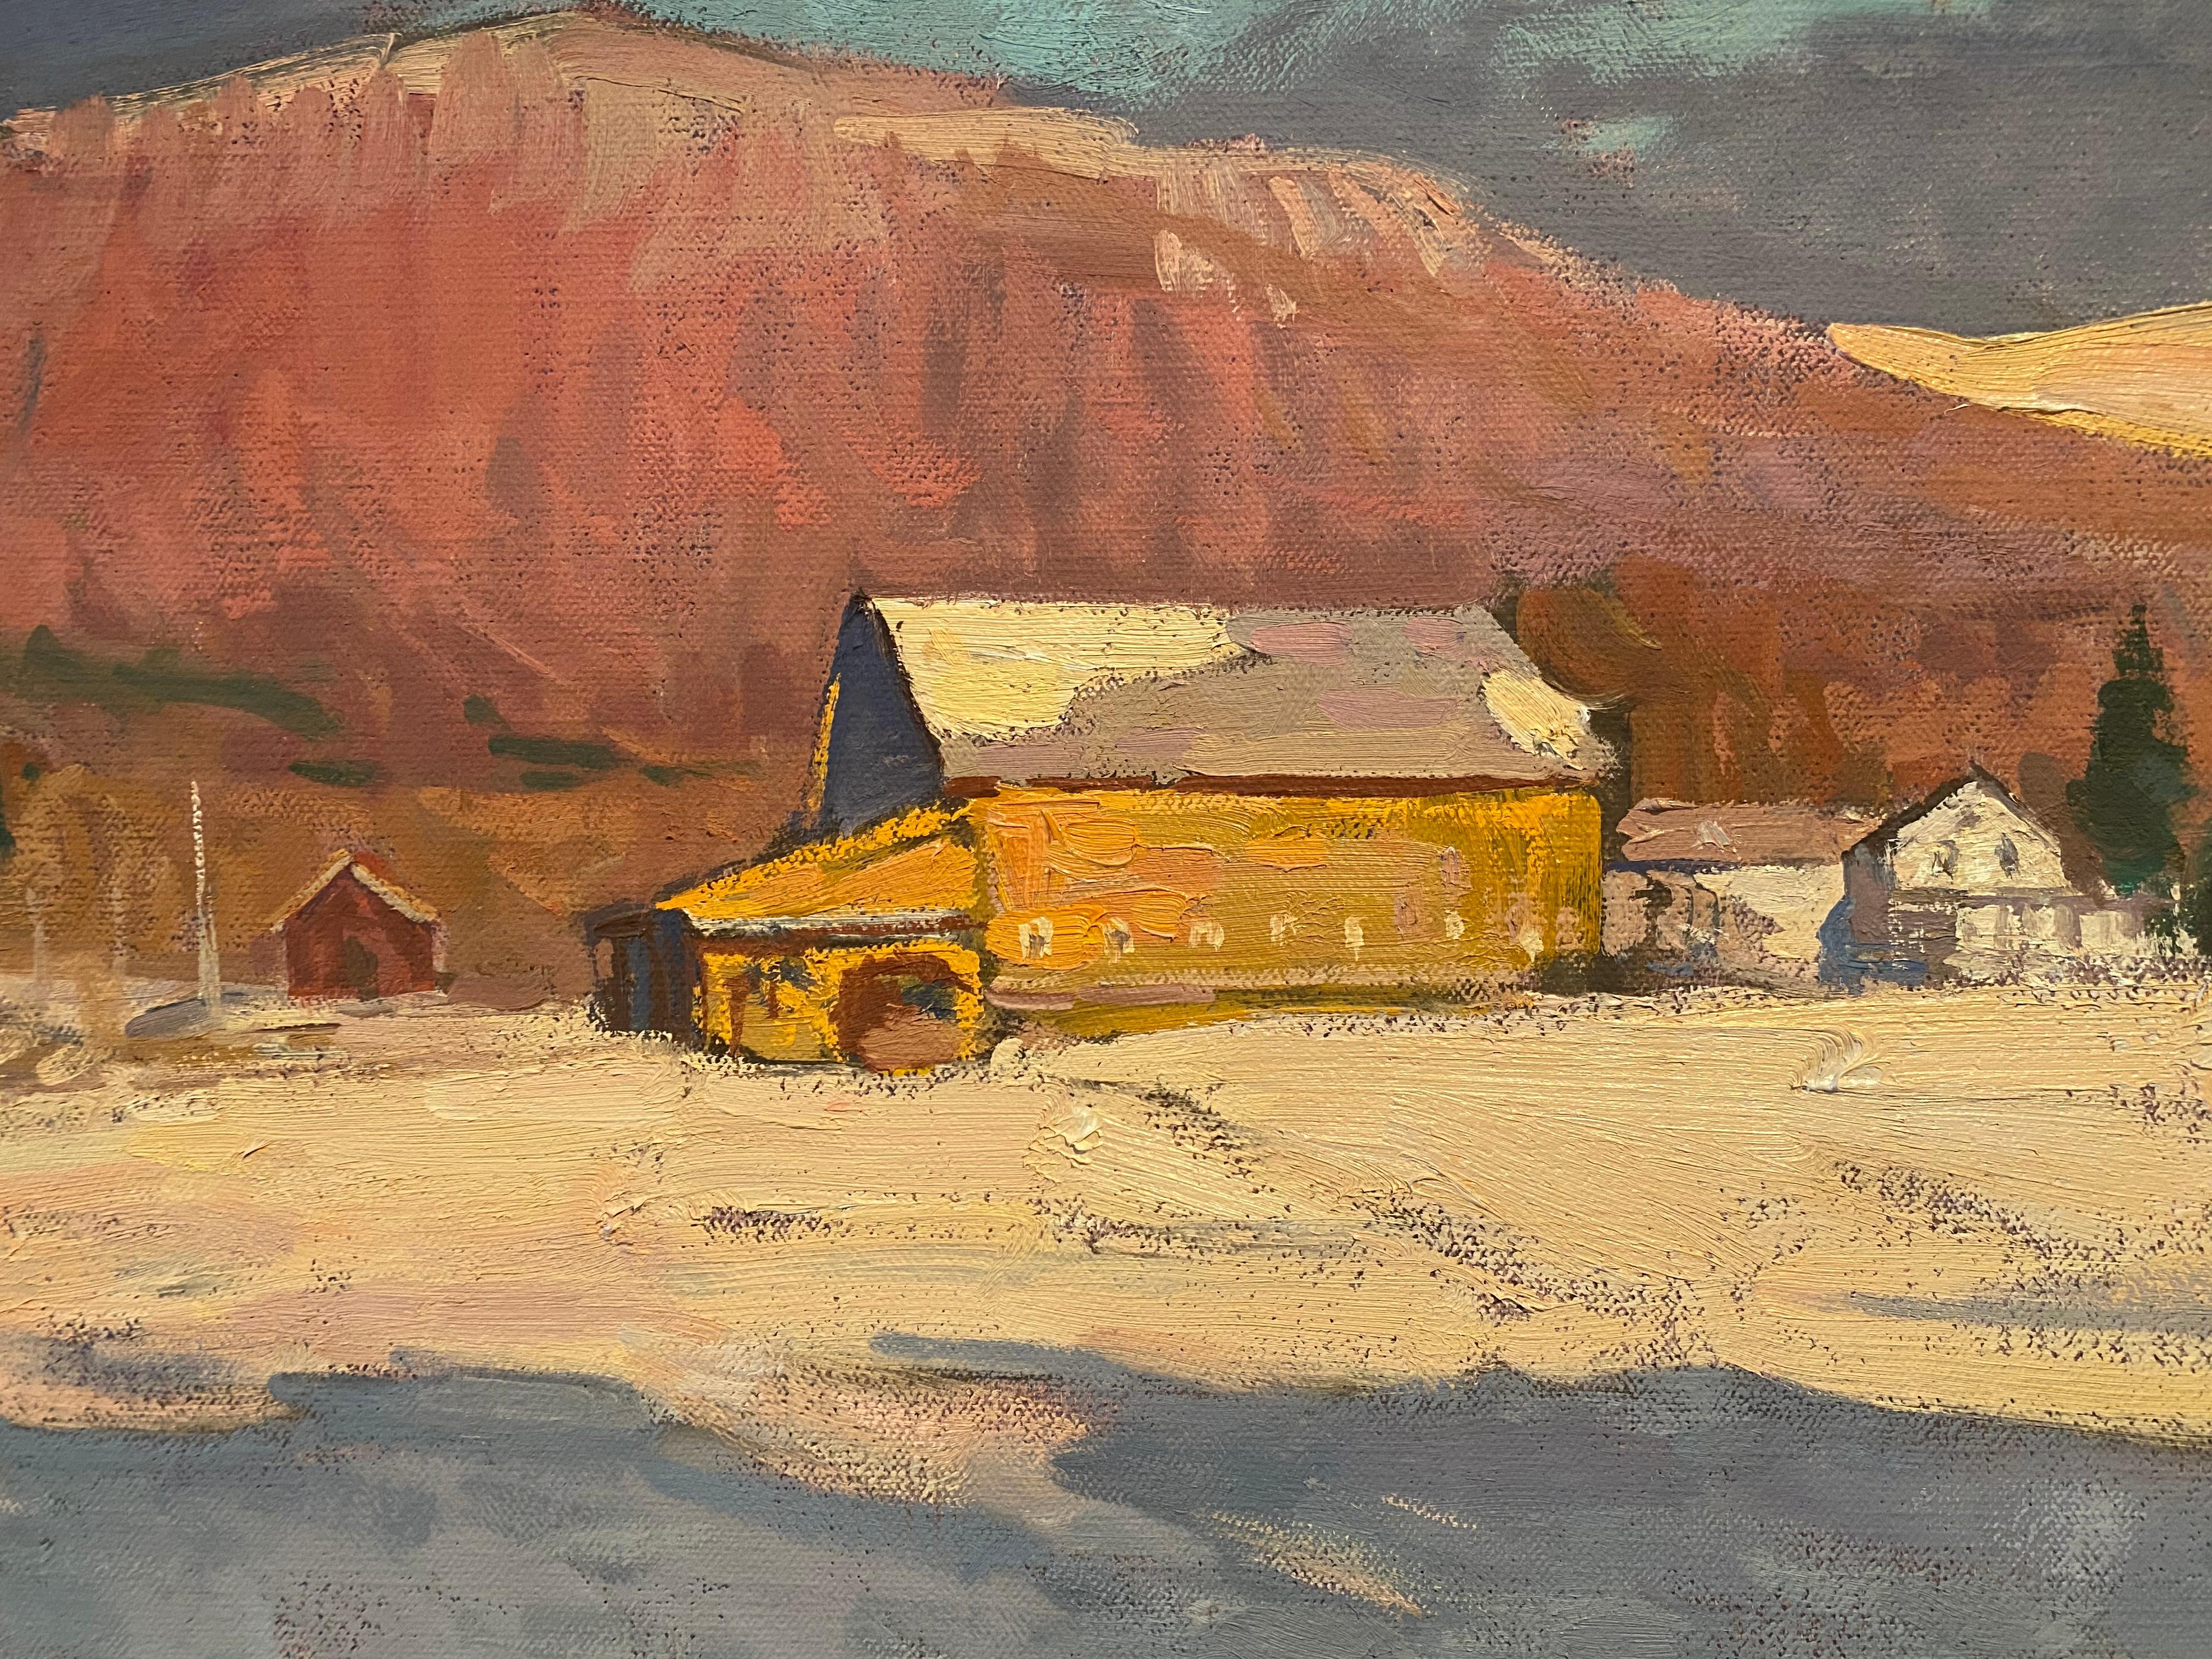 Framed dimensions: 37.5 x 45.5 inches

Painted en plein air, in Jeffersonville, Vermont, during February 2020's COVID-19 Lockdown, in preparation for his first 2-man exhibition with the Grenning Gallery, 